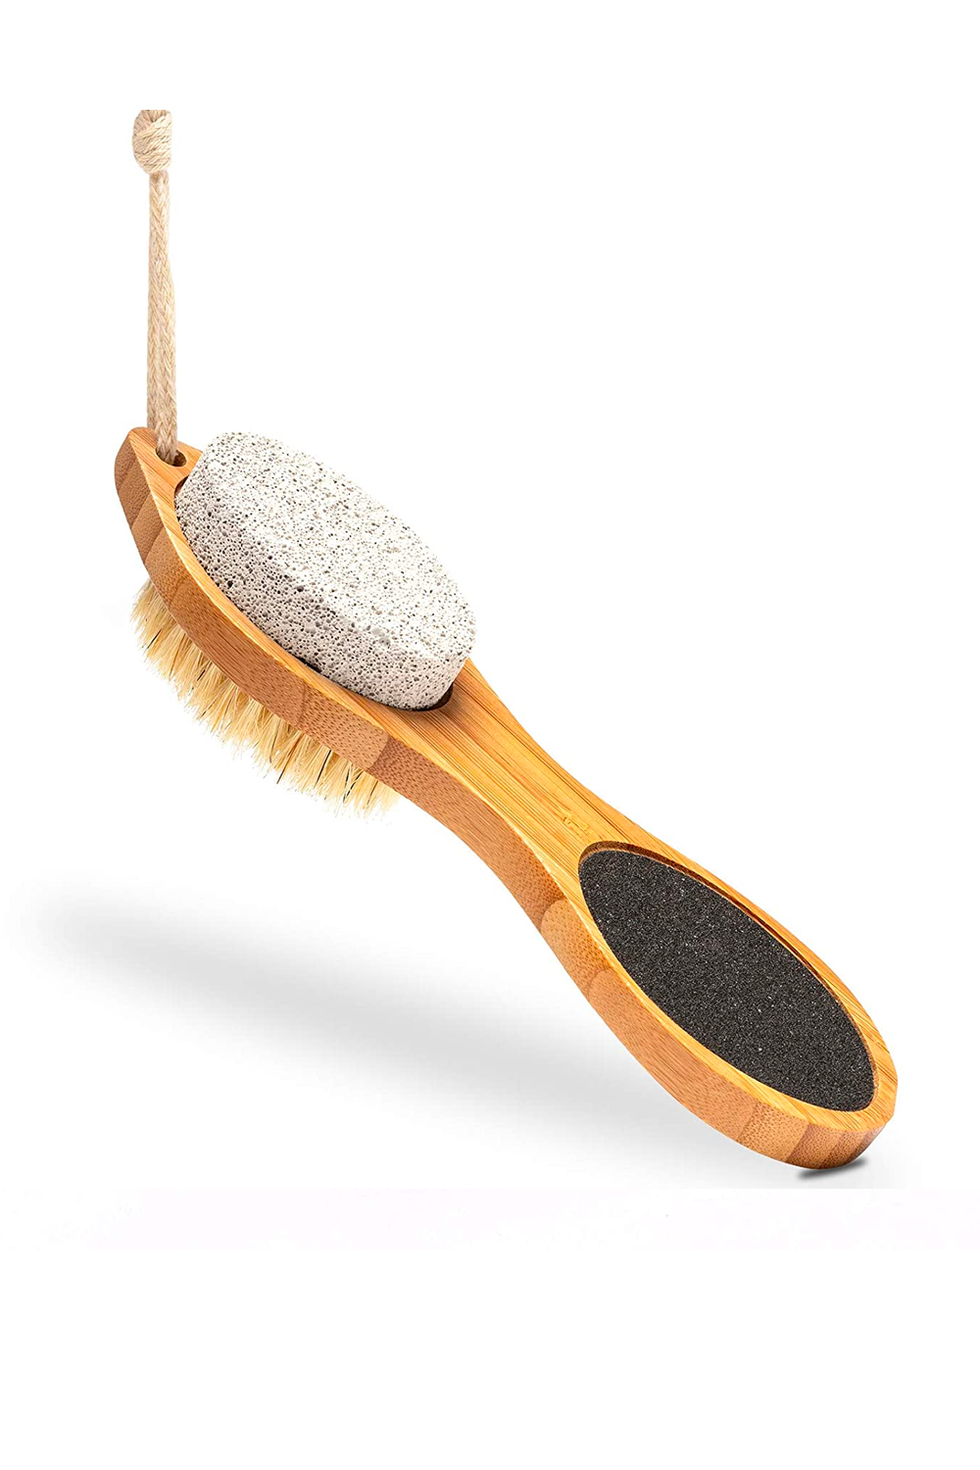 Pumice Stone Foot Scrubber - Pedicure Foot File with Handle for Dry Dead  Skin - Callus Remover for Feet - Foot Scraper - Exfoliating Brush for  Heels, Elbows, Hands Black